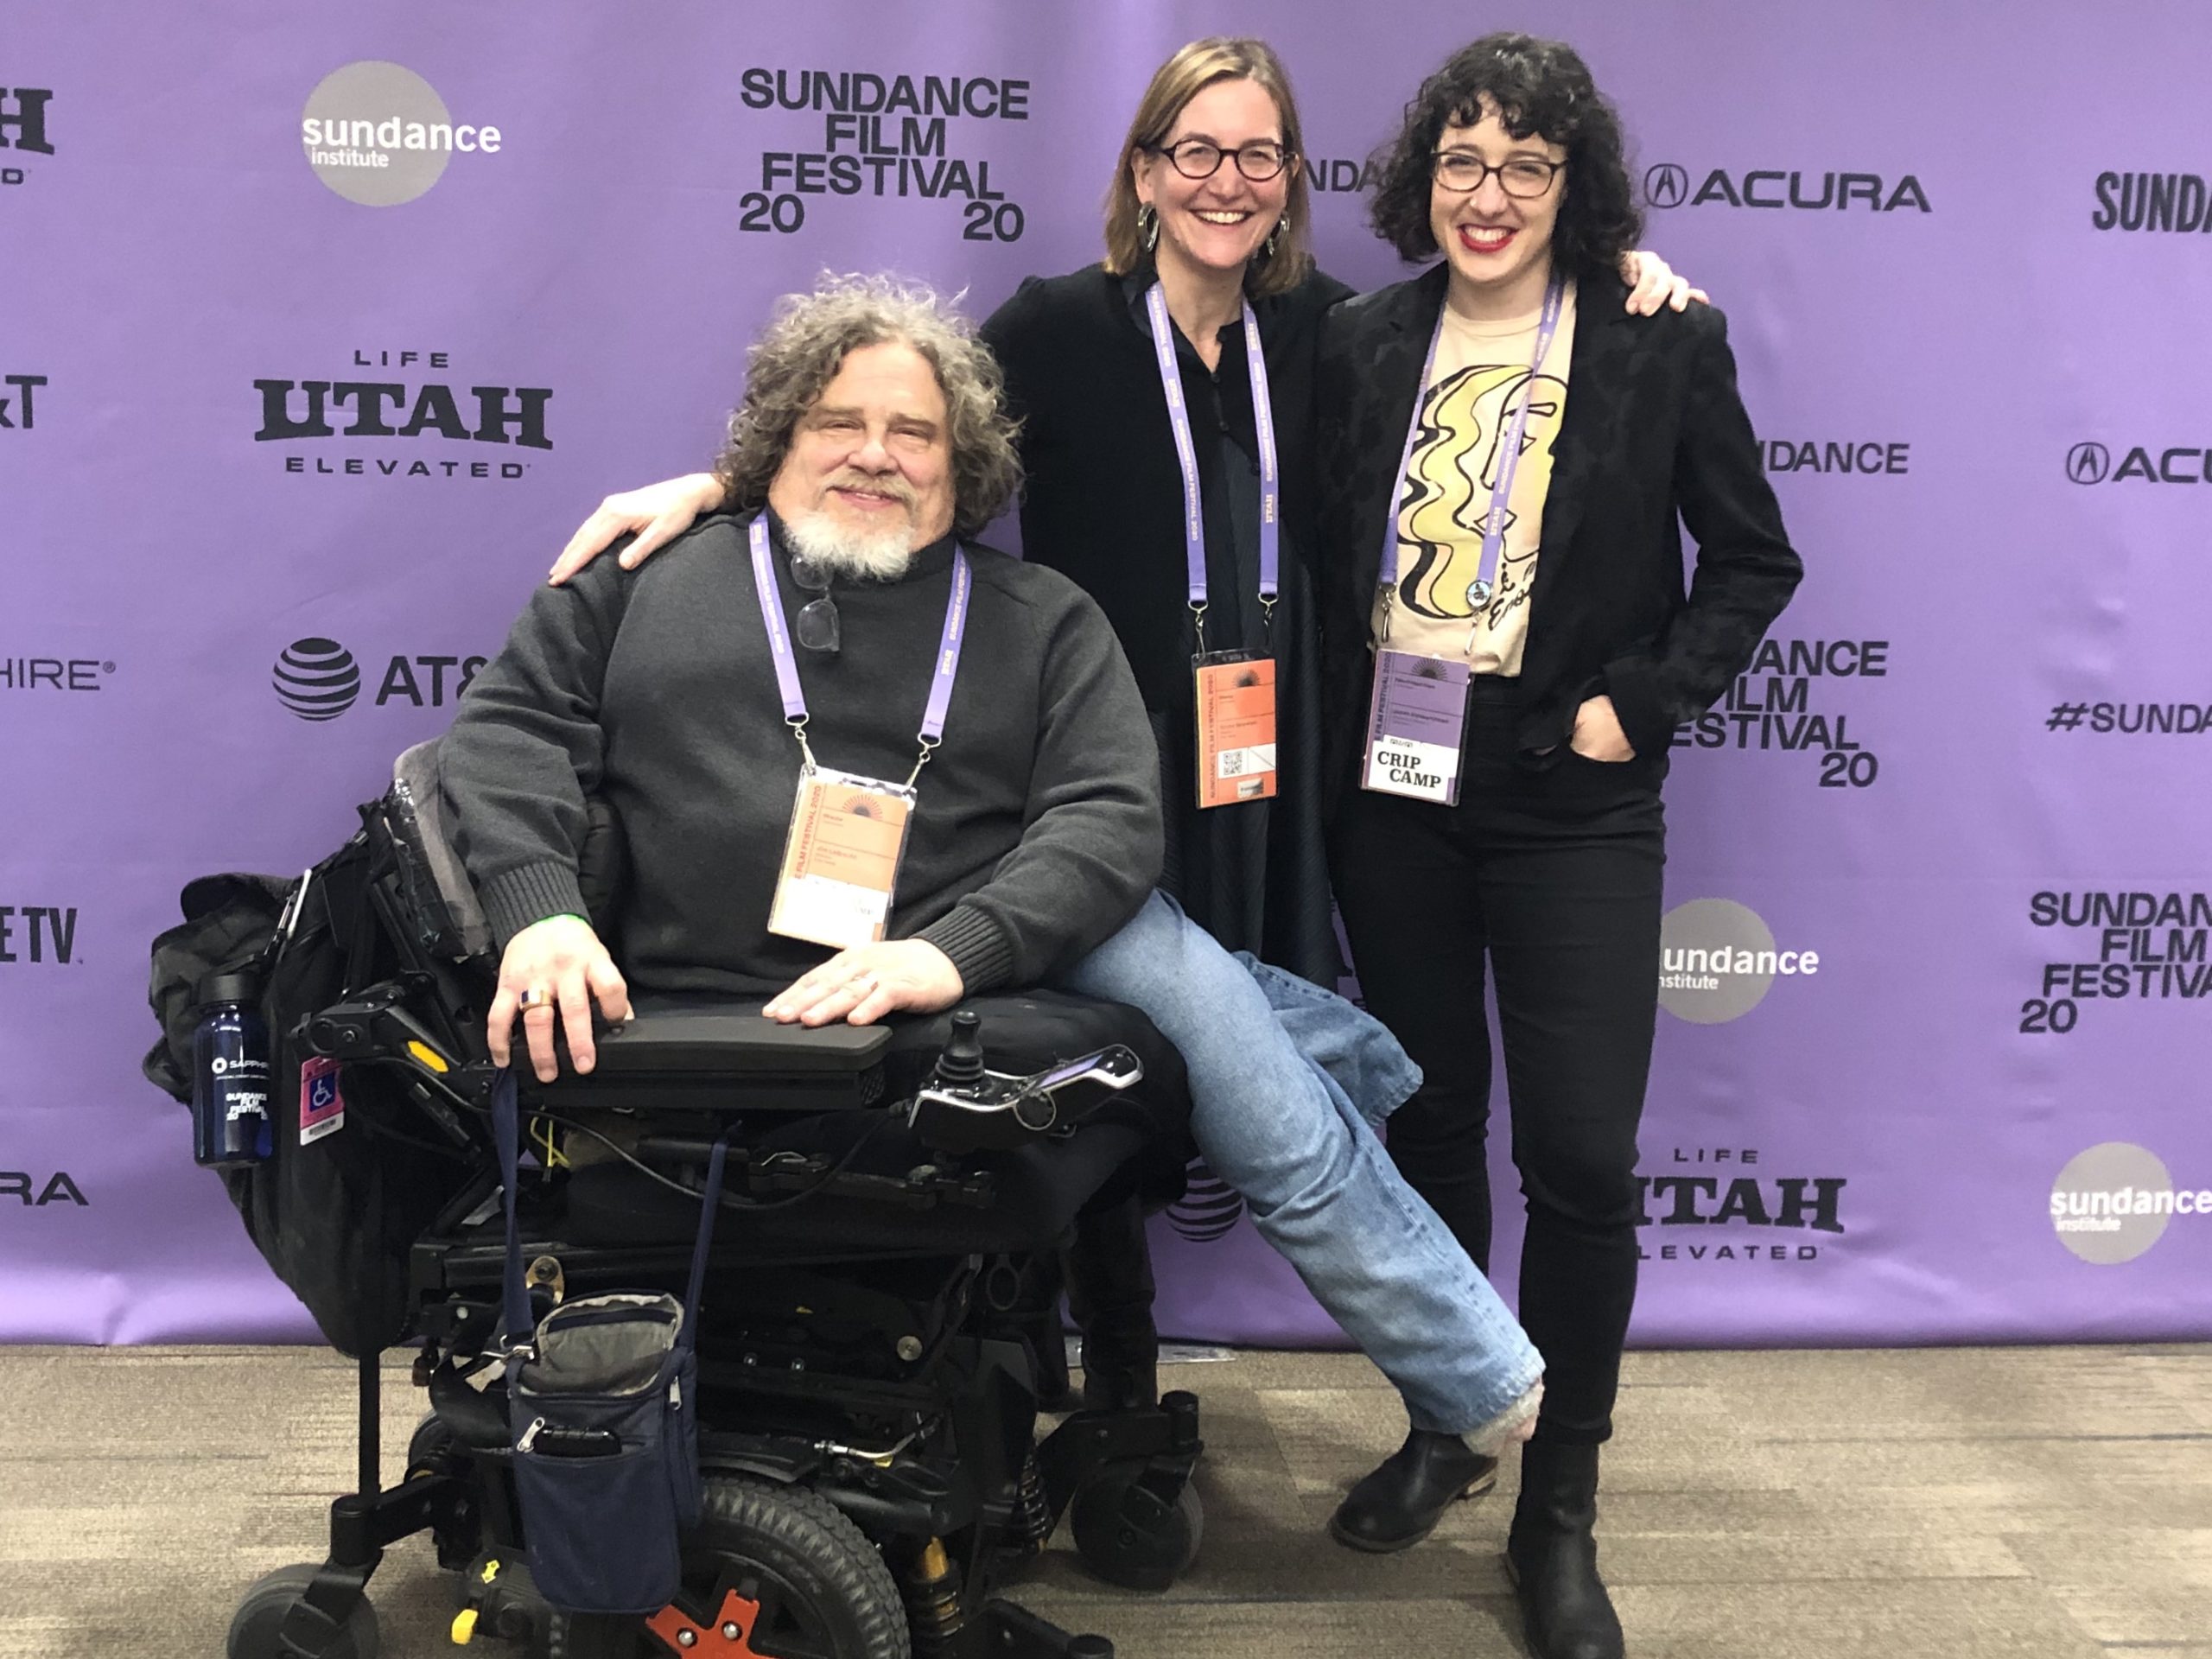 Three people pose together at the Sundance Film Festival against a purple backdrop with logos. The person on the left sits in a wheelchair, while the two others stand beside them, smiling. All wear festival badges and look cheerful, embodying the spirit of Berkeley Journalism's diverse storytelling.
